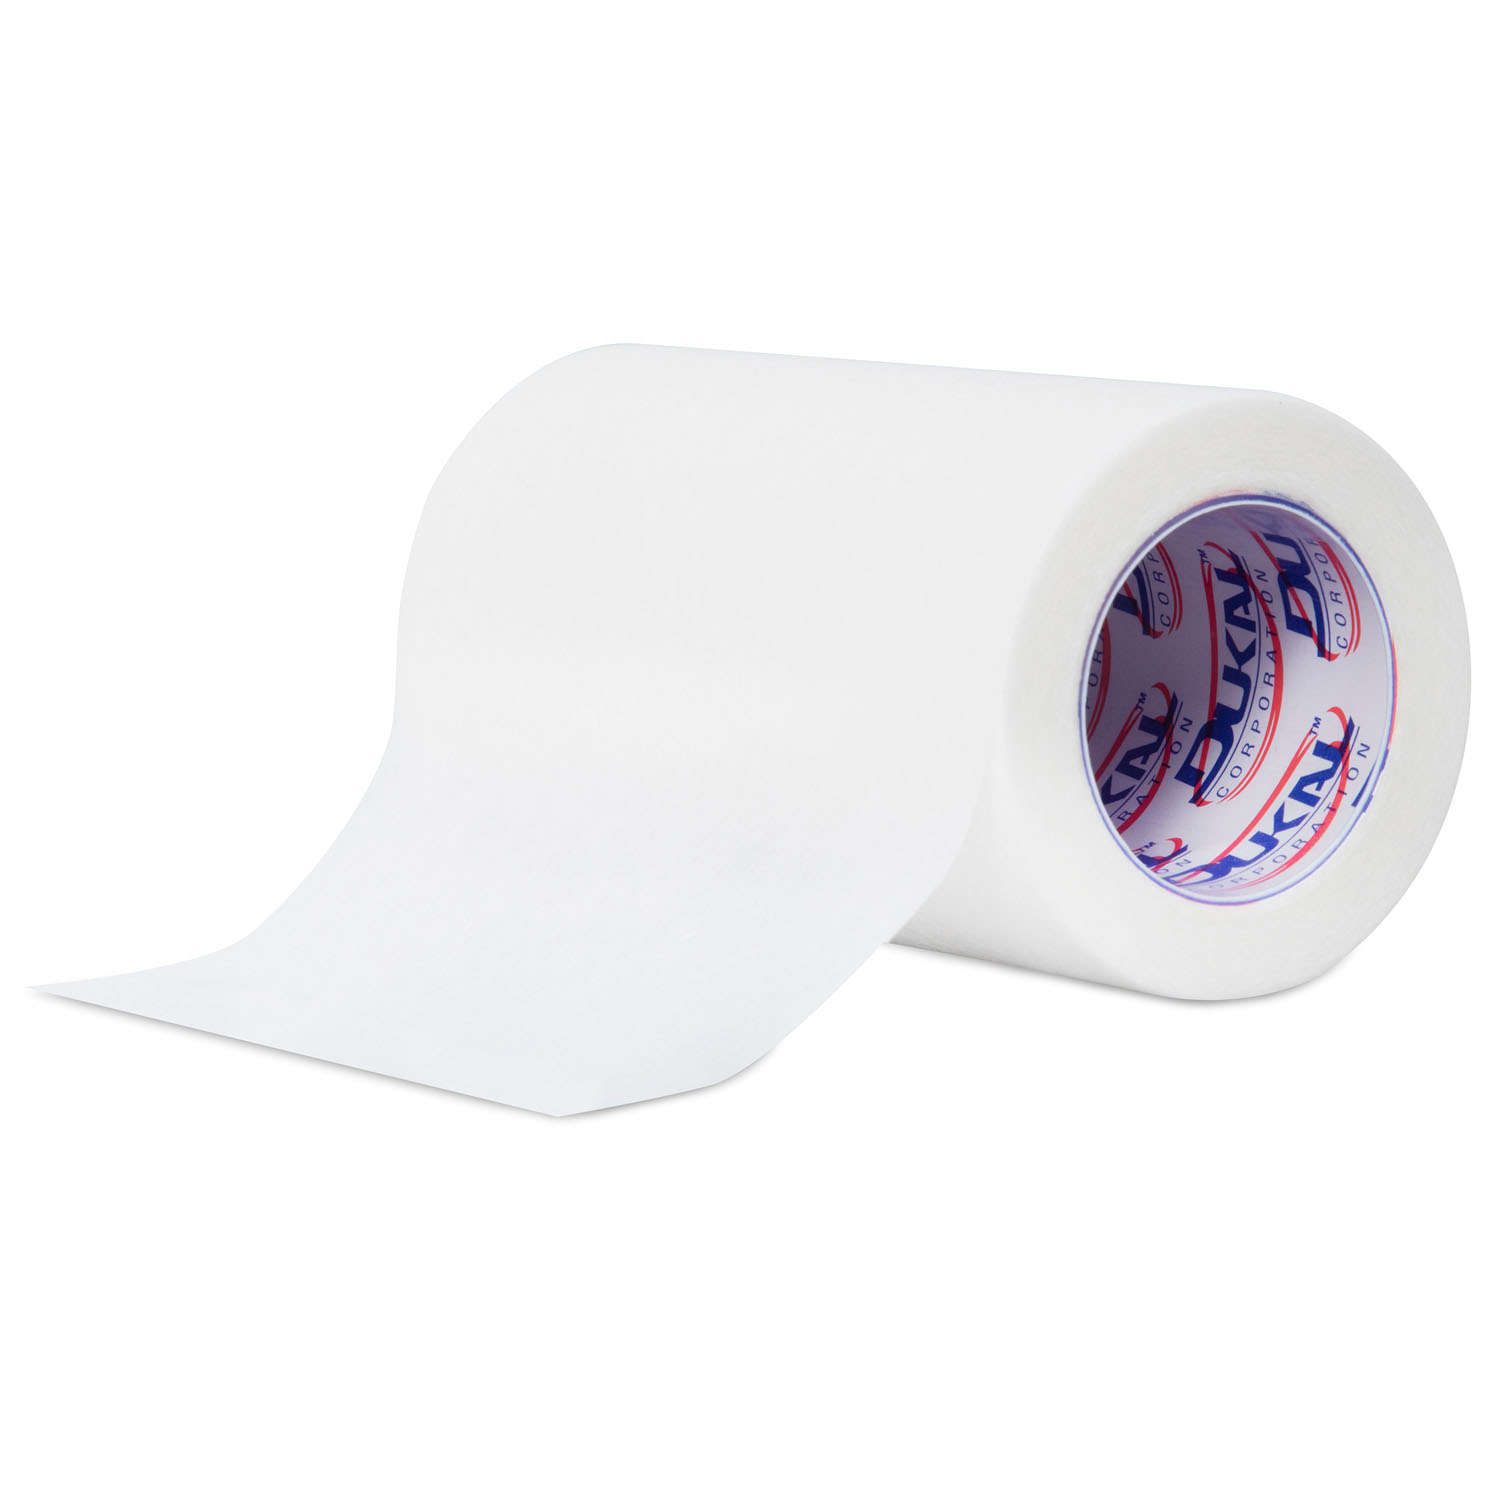 DUKAL SURGICAL TAPE - PAPER : P310 CS $86.51 Stocked